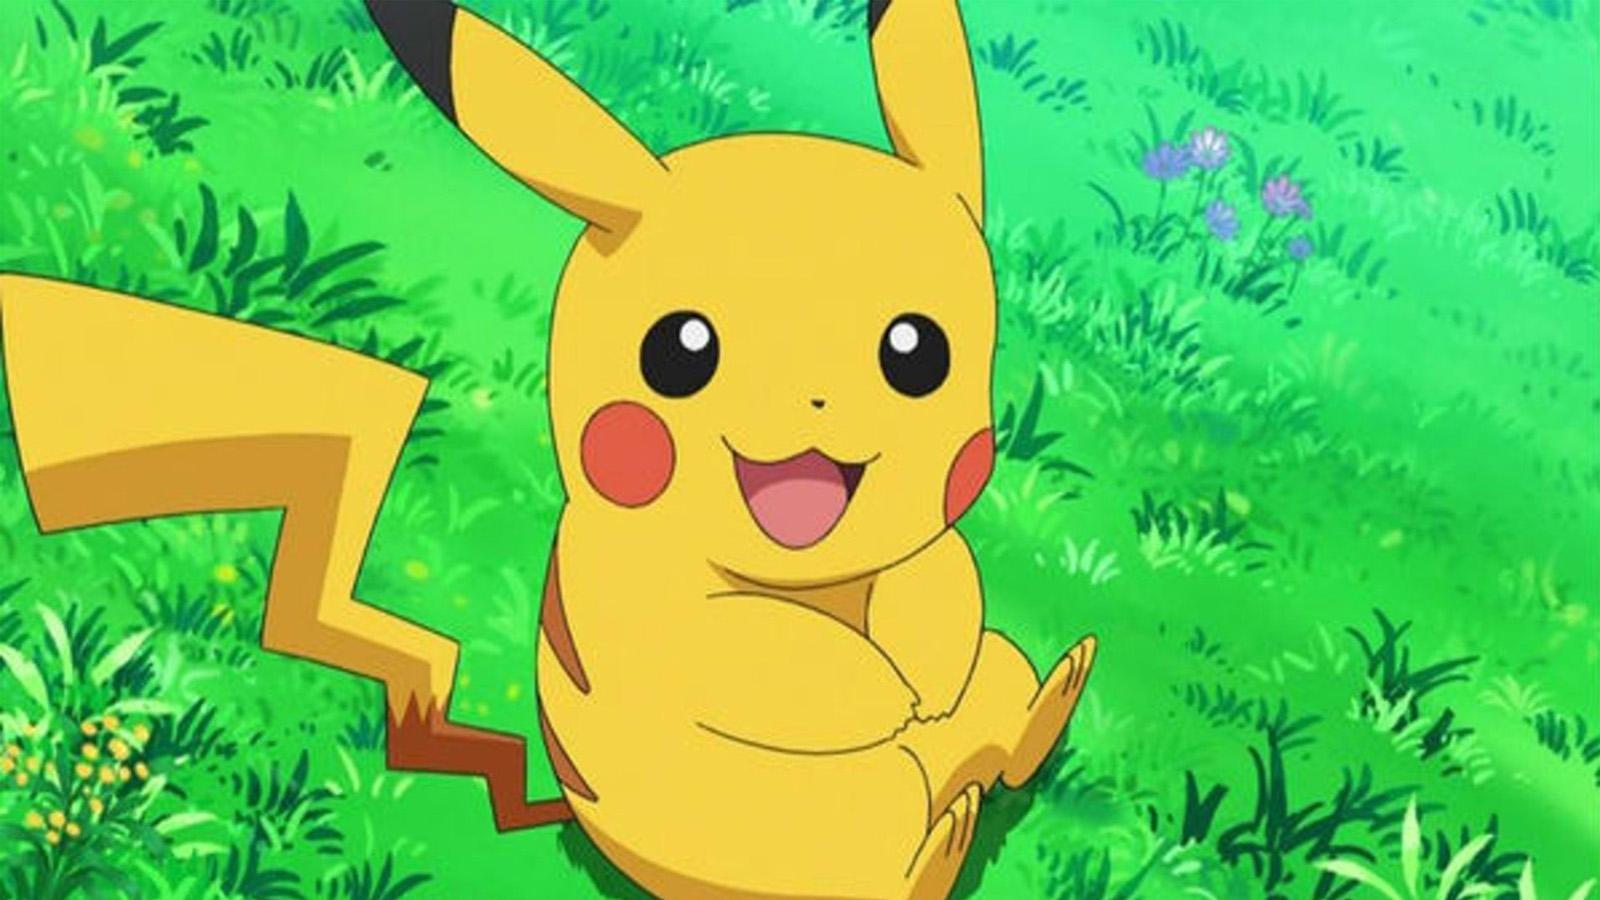 Pikachu in the anime